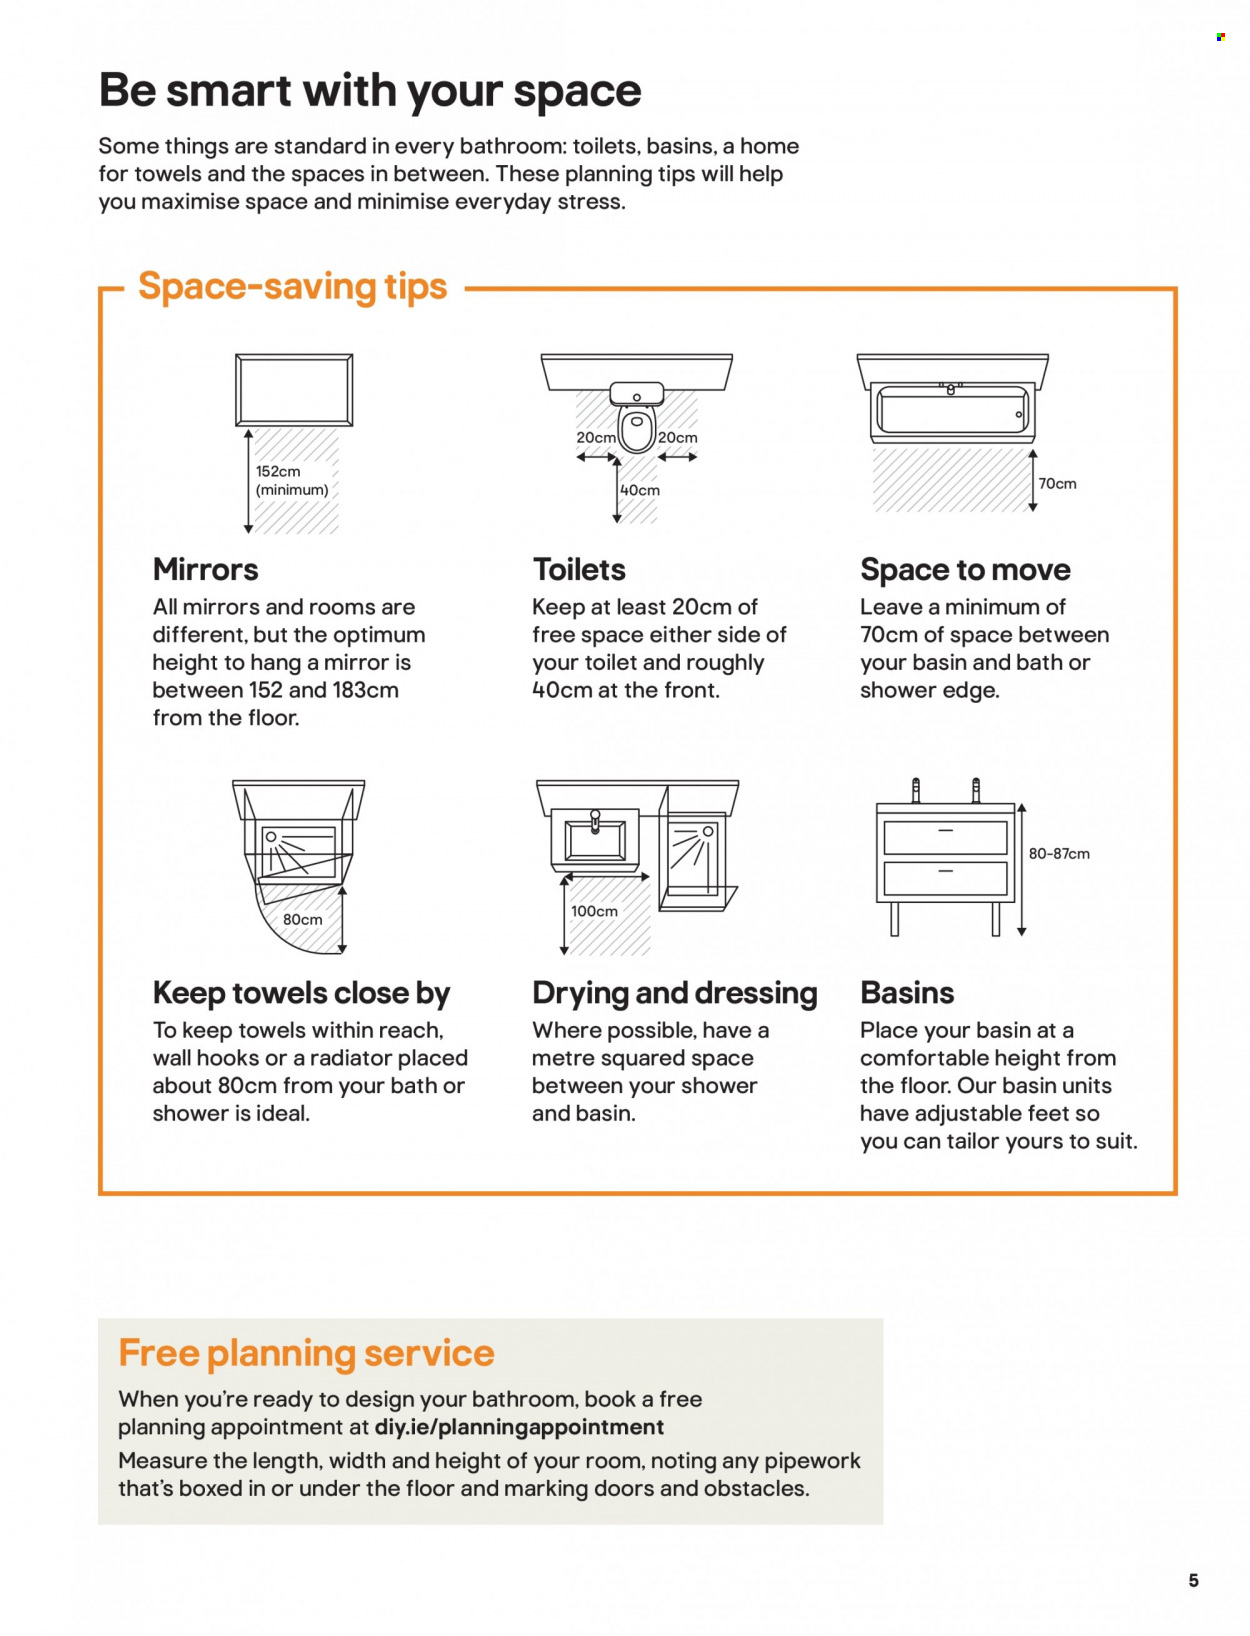 B&Q offer . Page 5.